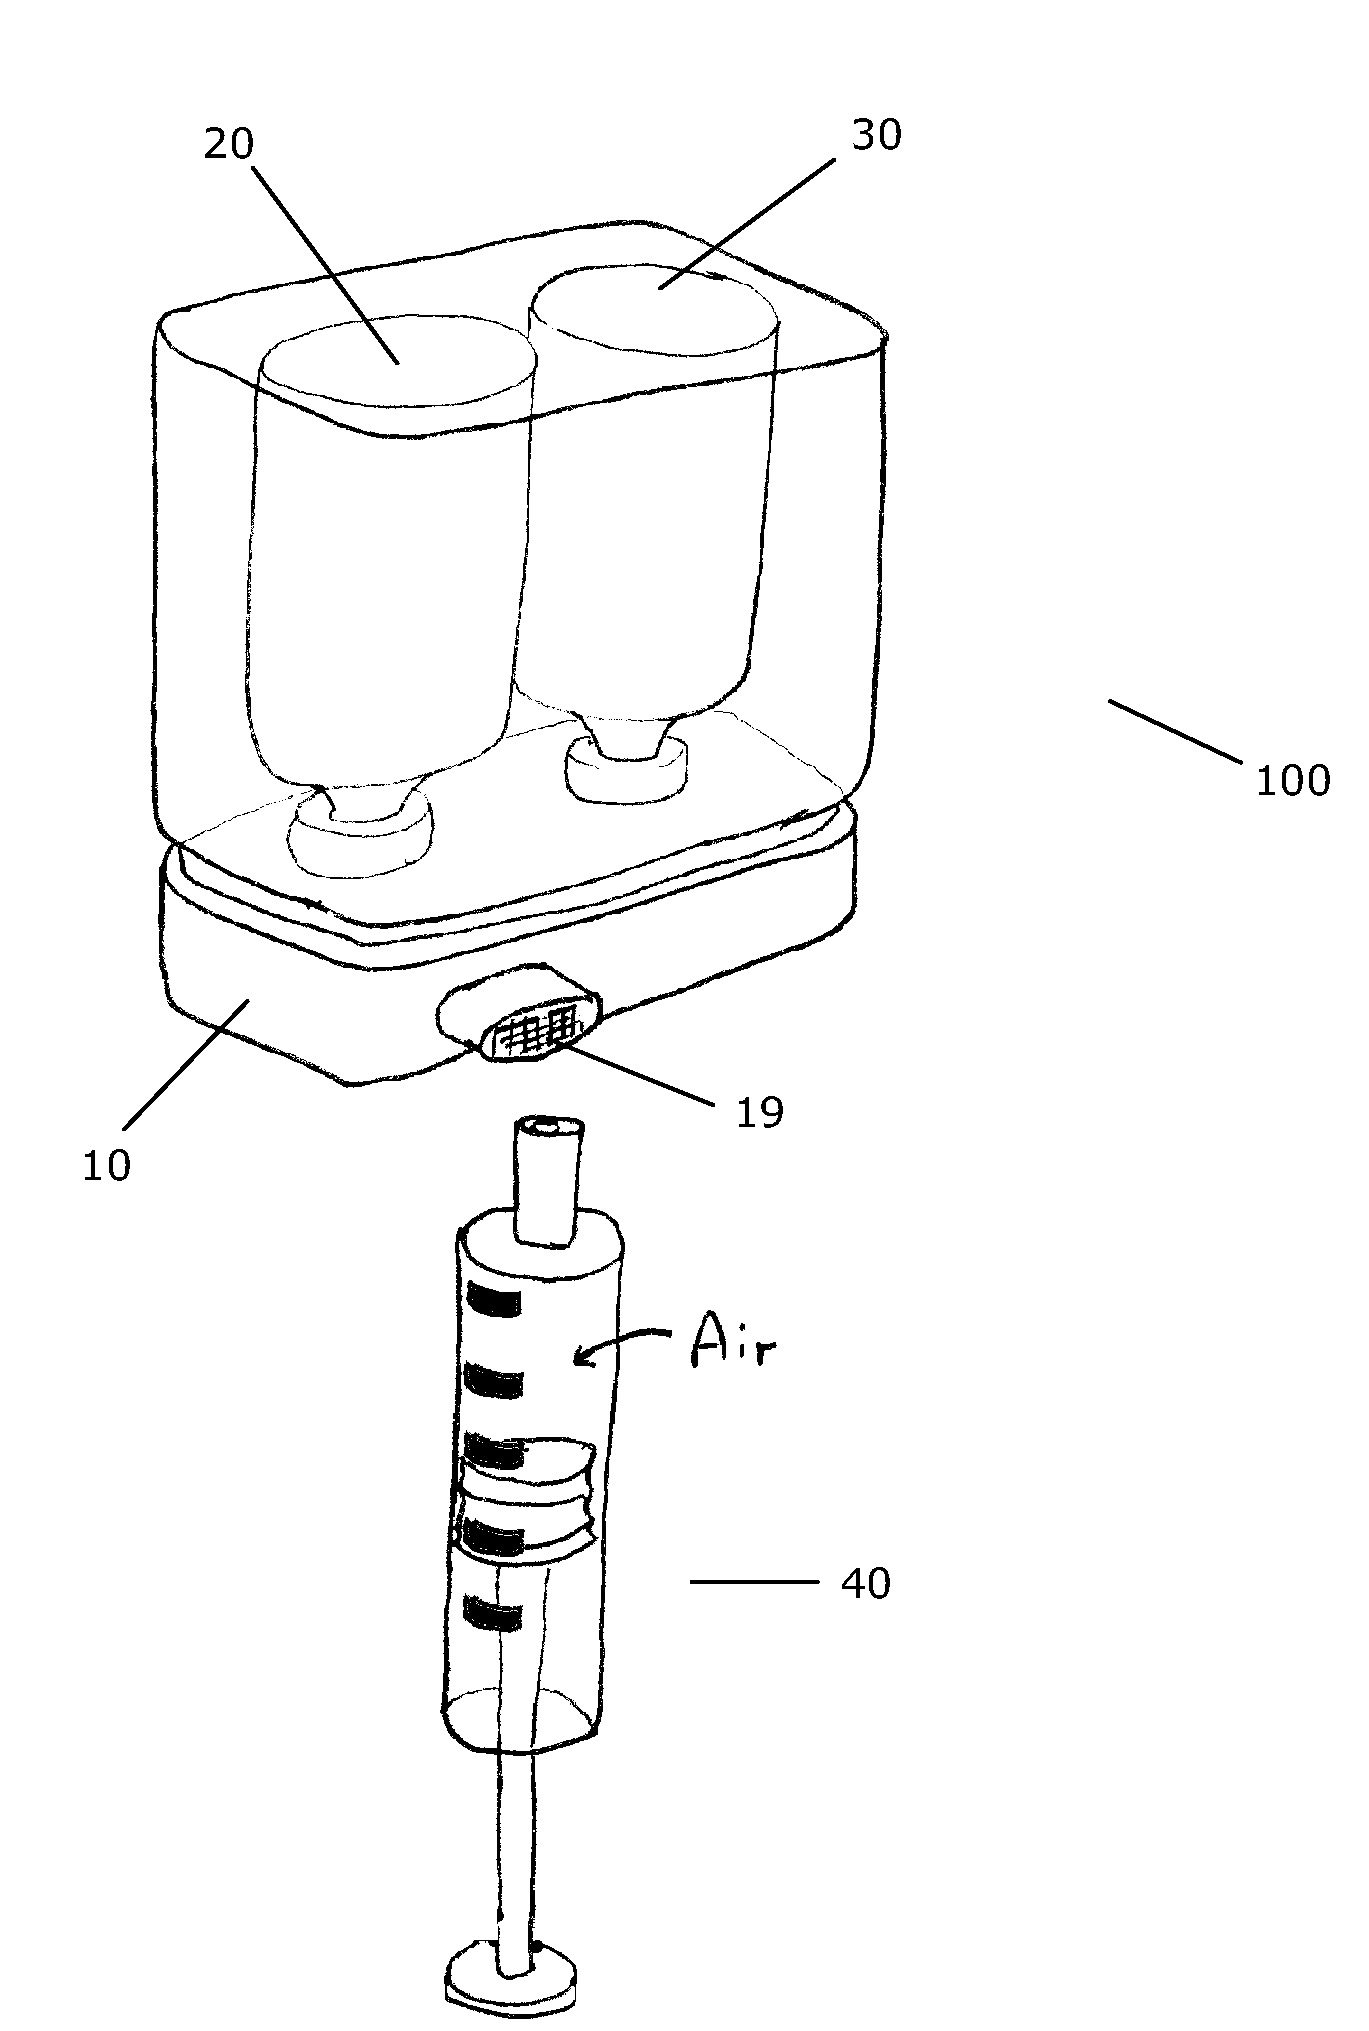 Transfer System for Forming a Drug Solution from a Lyophilized Drug